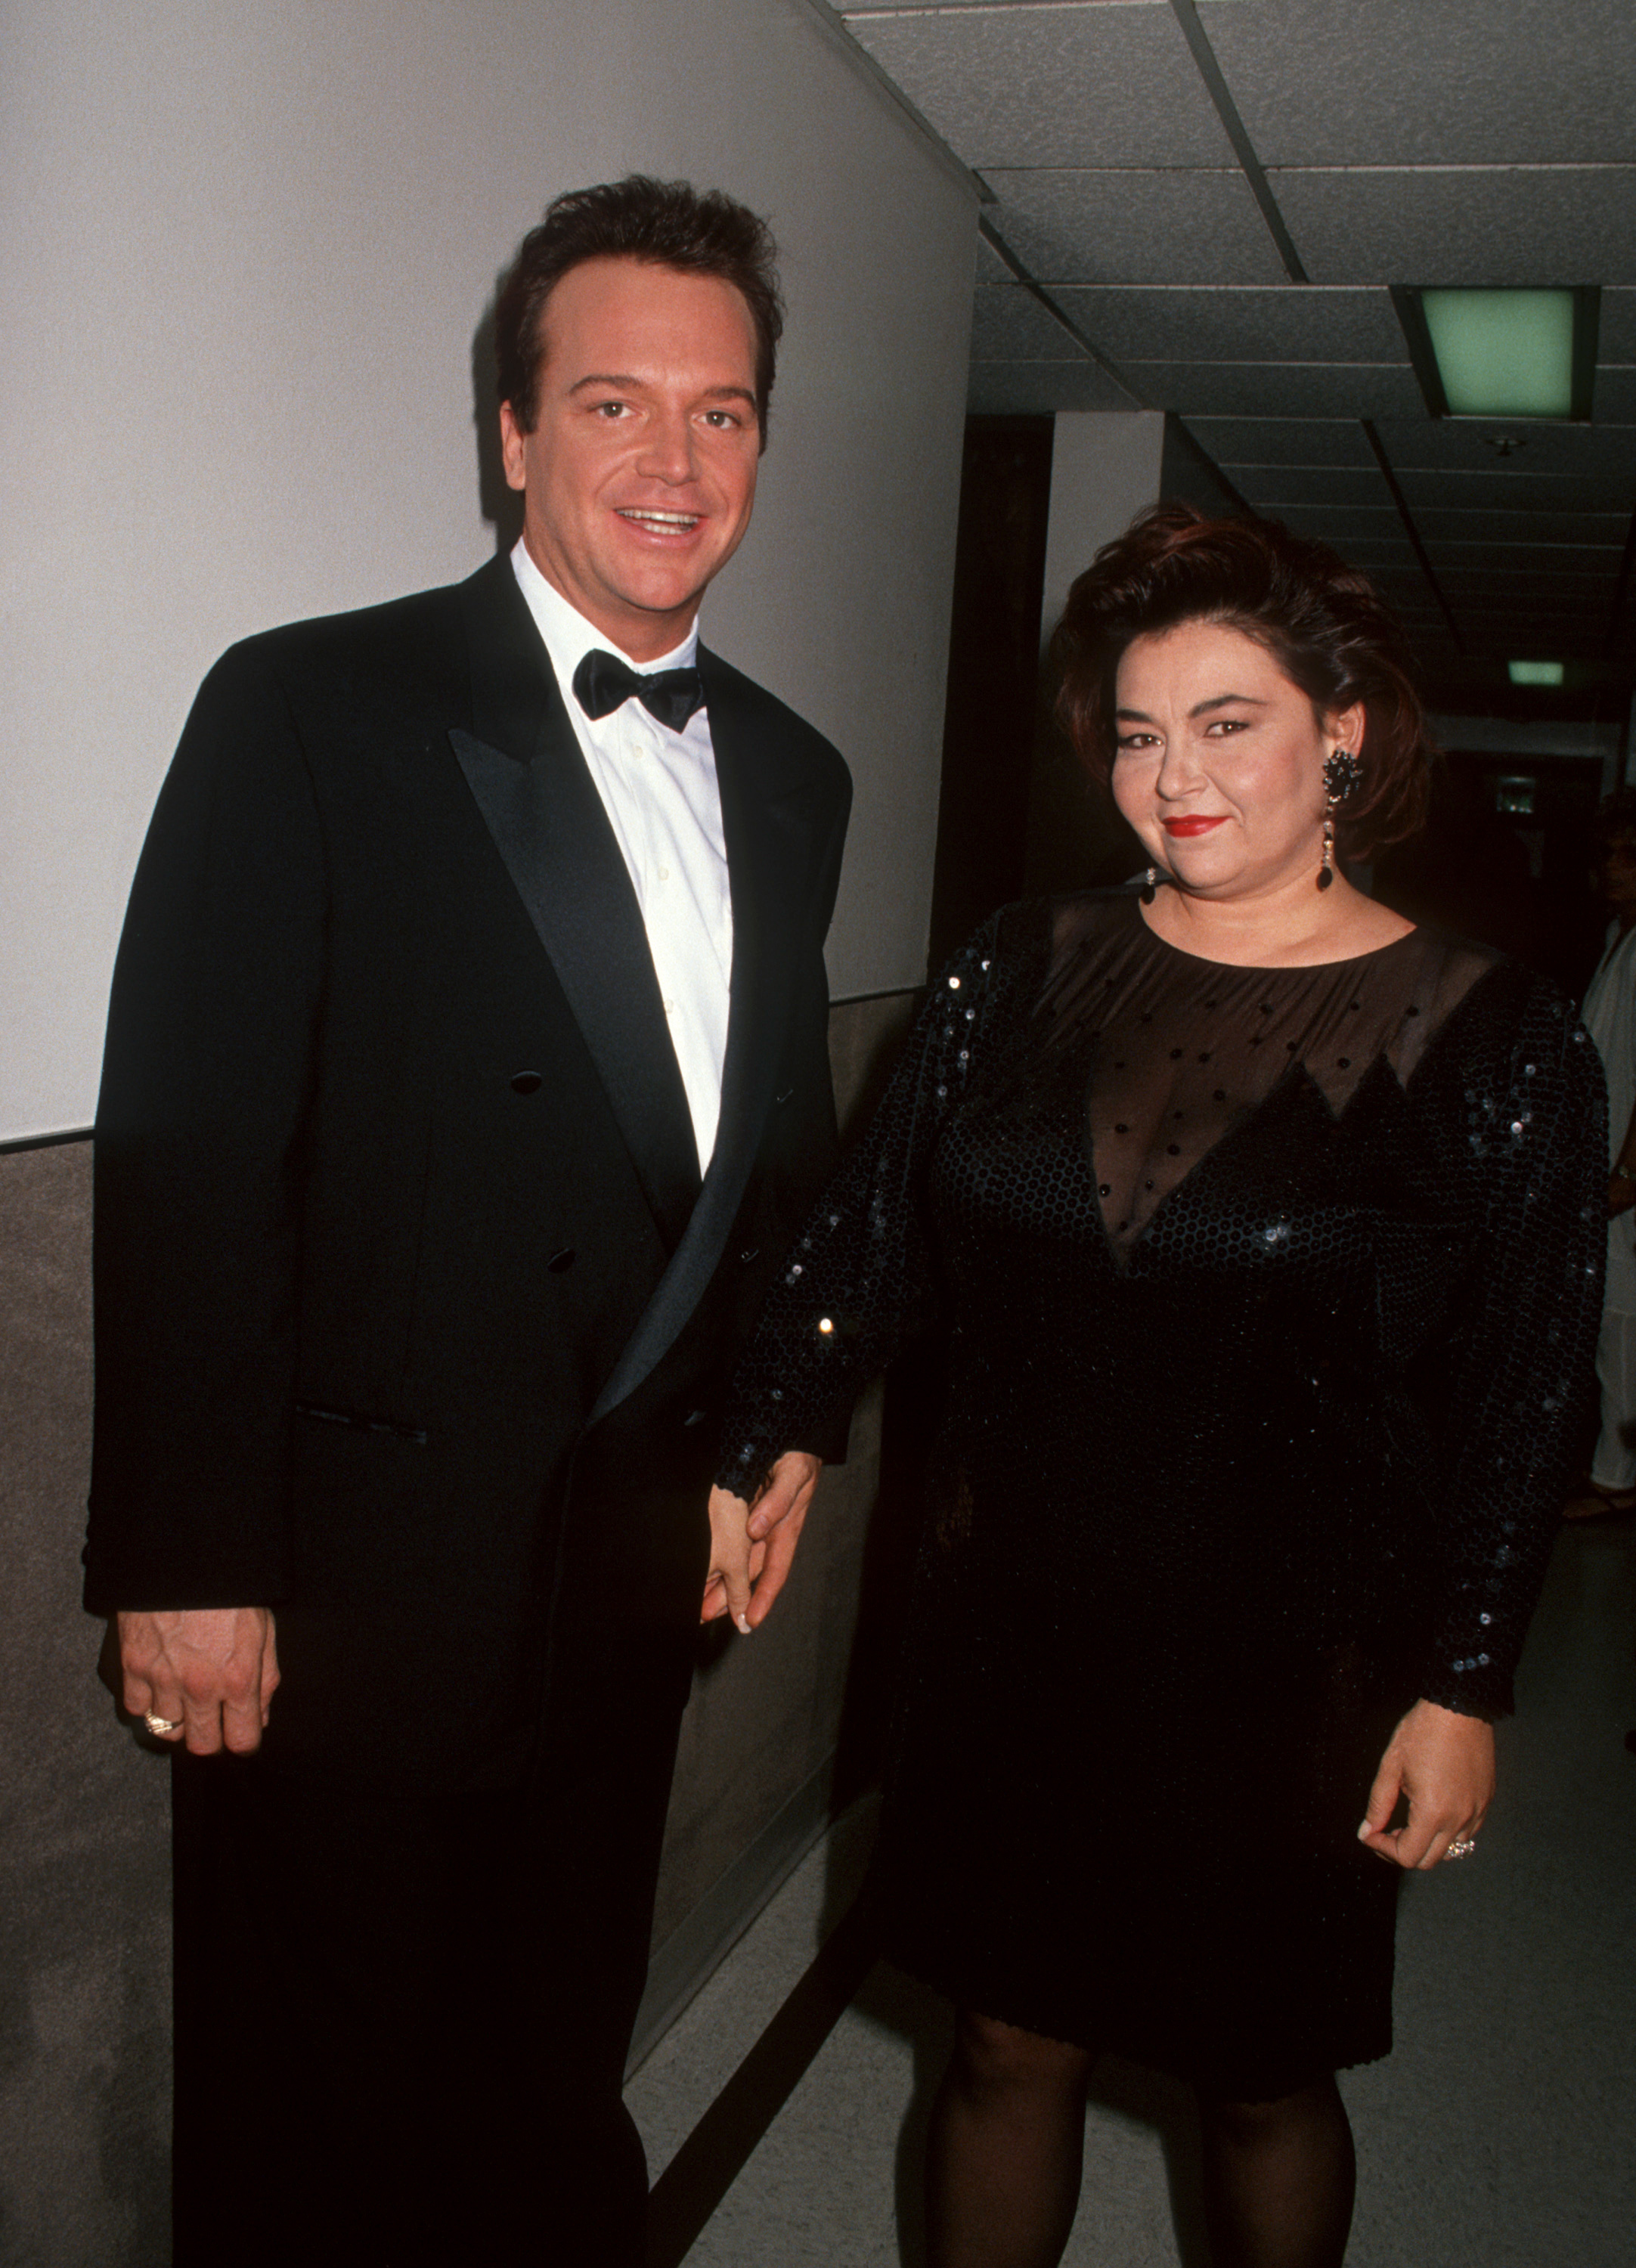 Tom Arnold and Roseanne at NBC Studios in Burbank California on September 8, 1991 | Source: Getty Images